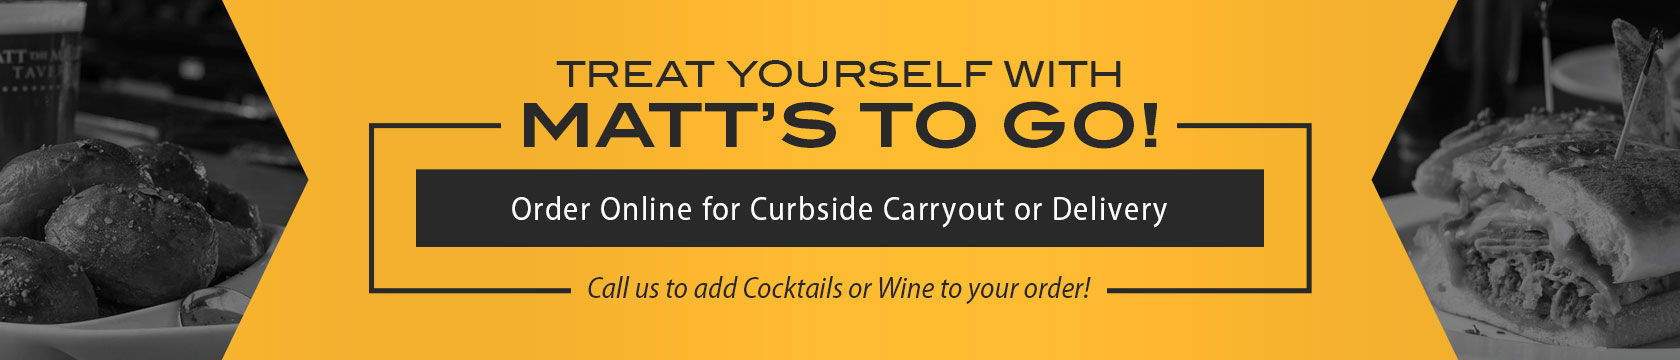 Treat Yourself with Matt’s To Go! Order Online for Curbside Carryout or Delivery! Call us to add Cocktails or Wine to your order!